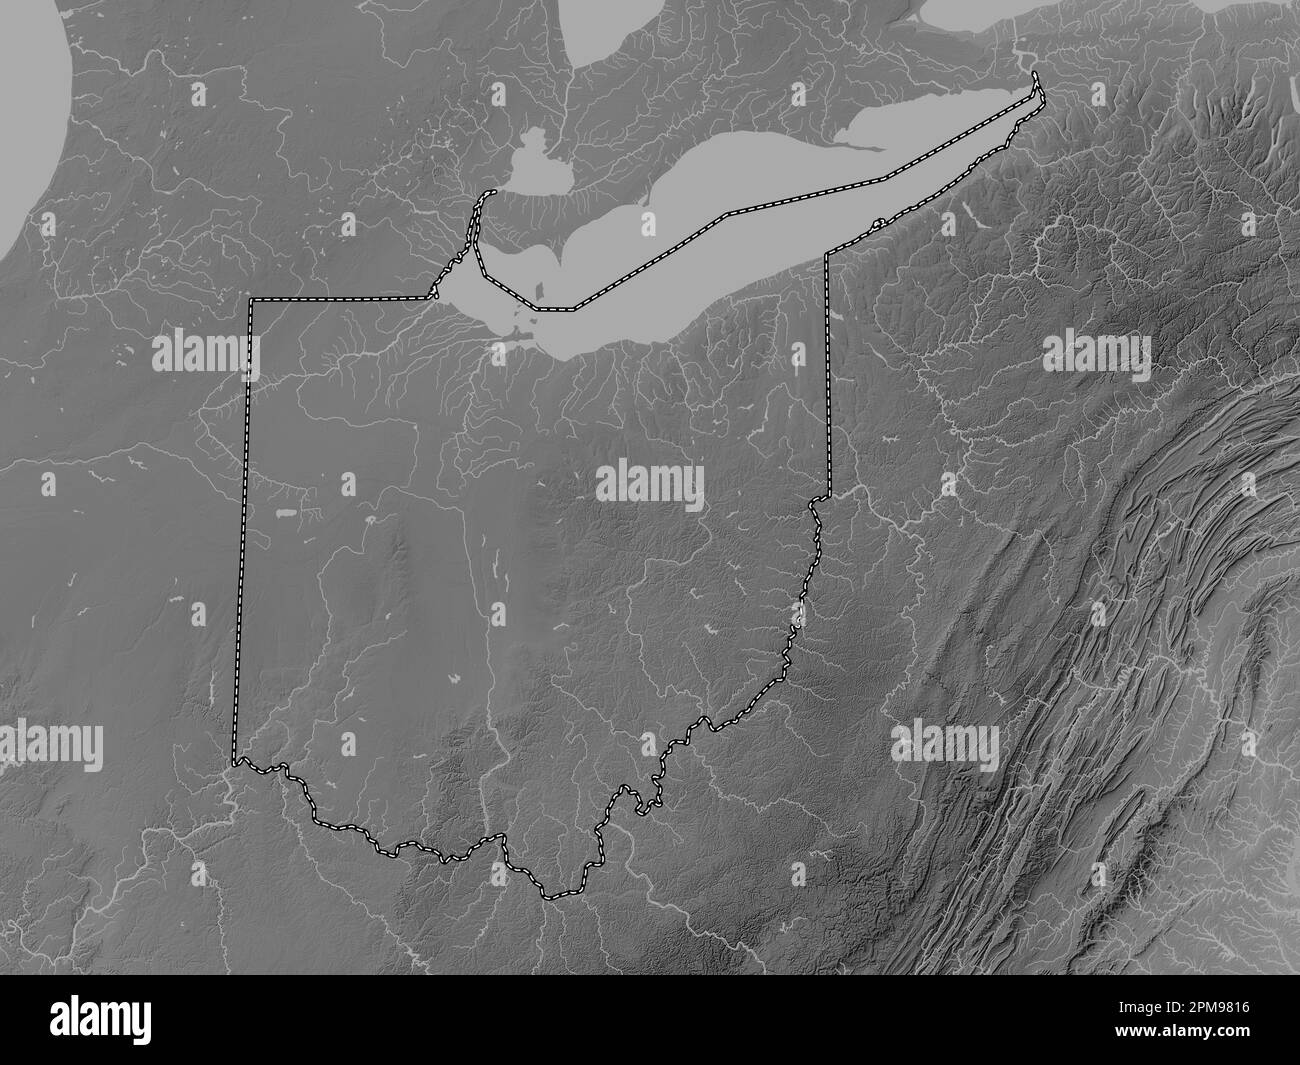 Ohio, state of United States of America. Grayscale elevation map with lakes and rivers Stock Photo